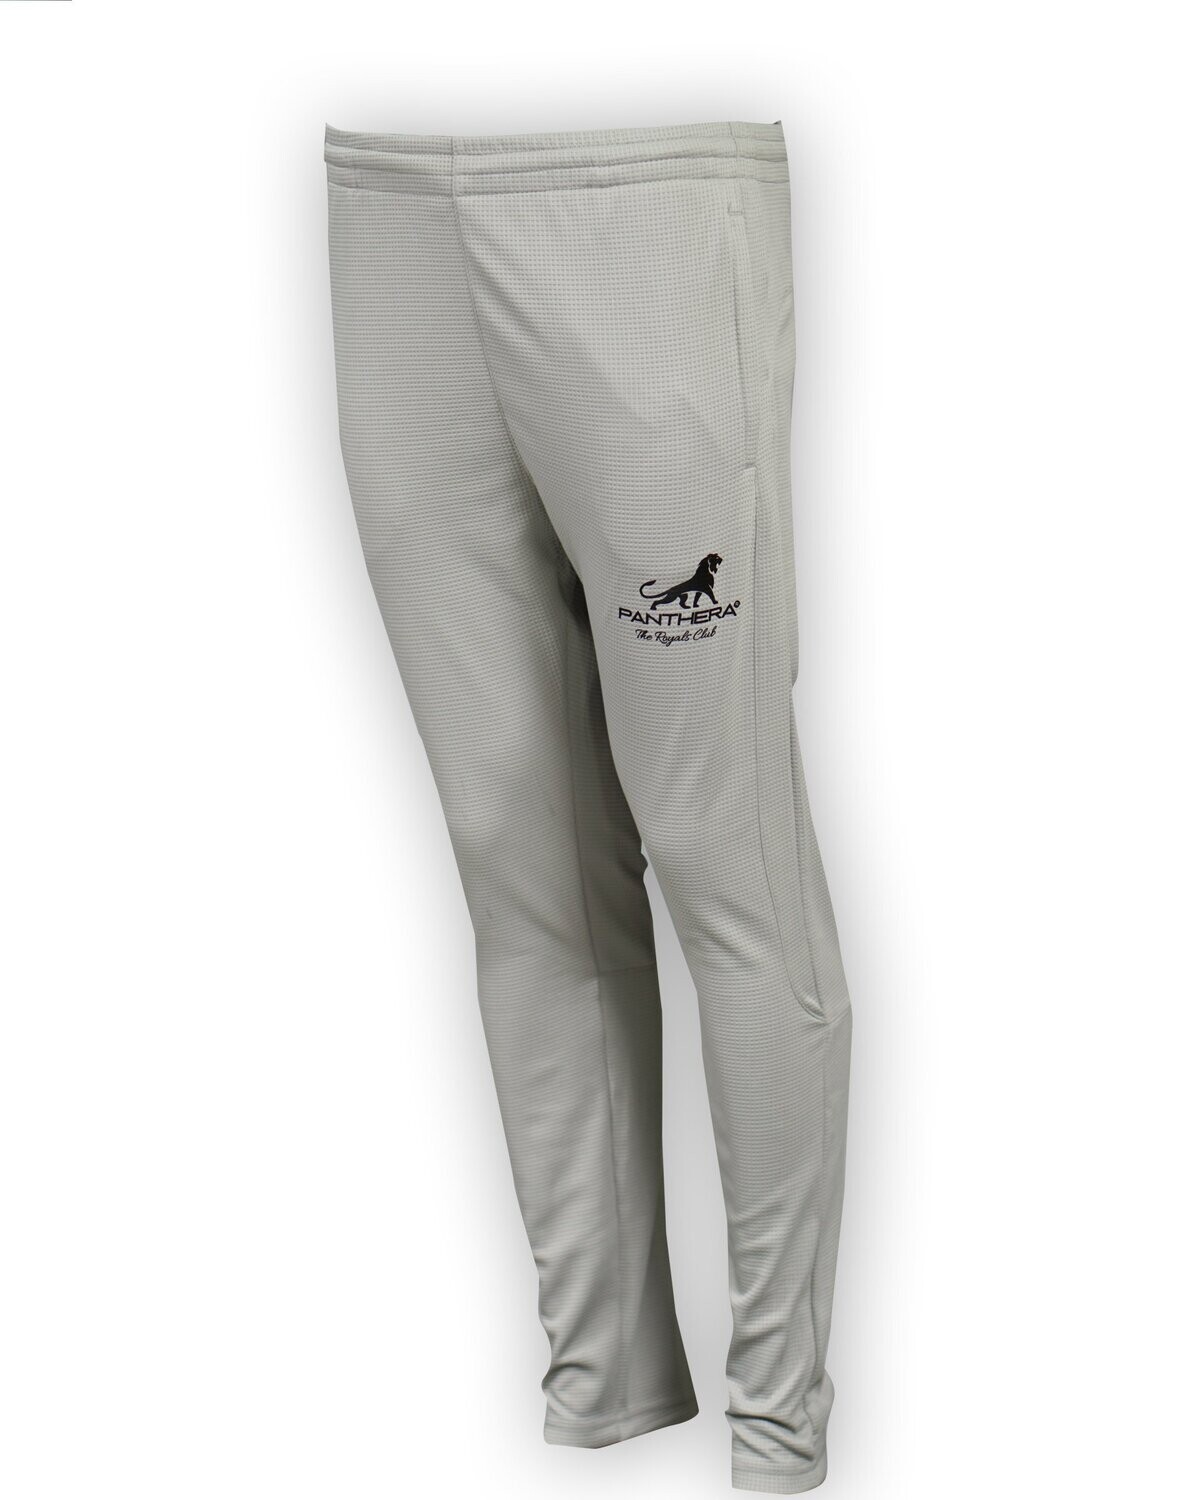 PANTHERA THERMAL TROUSERS SWEAT- WICKING FABRIC, 100% POLYESTER THERMAL  (100% DRY FIT)